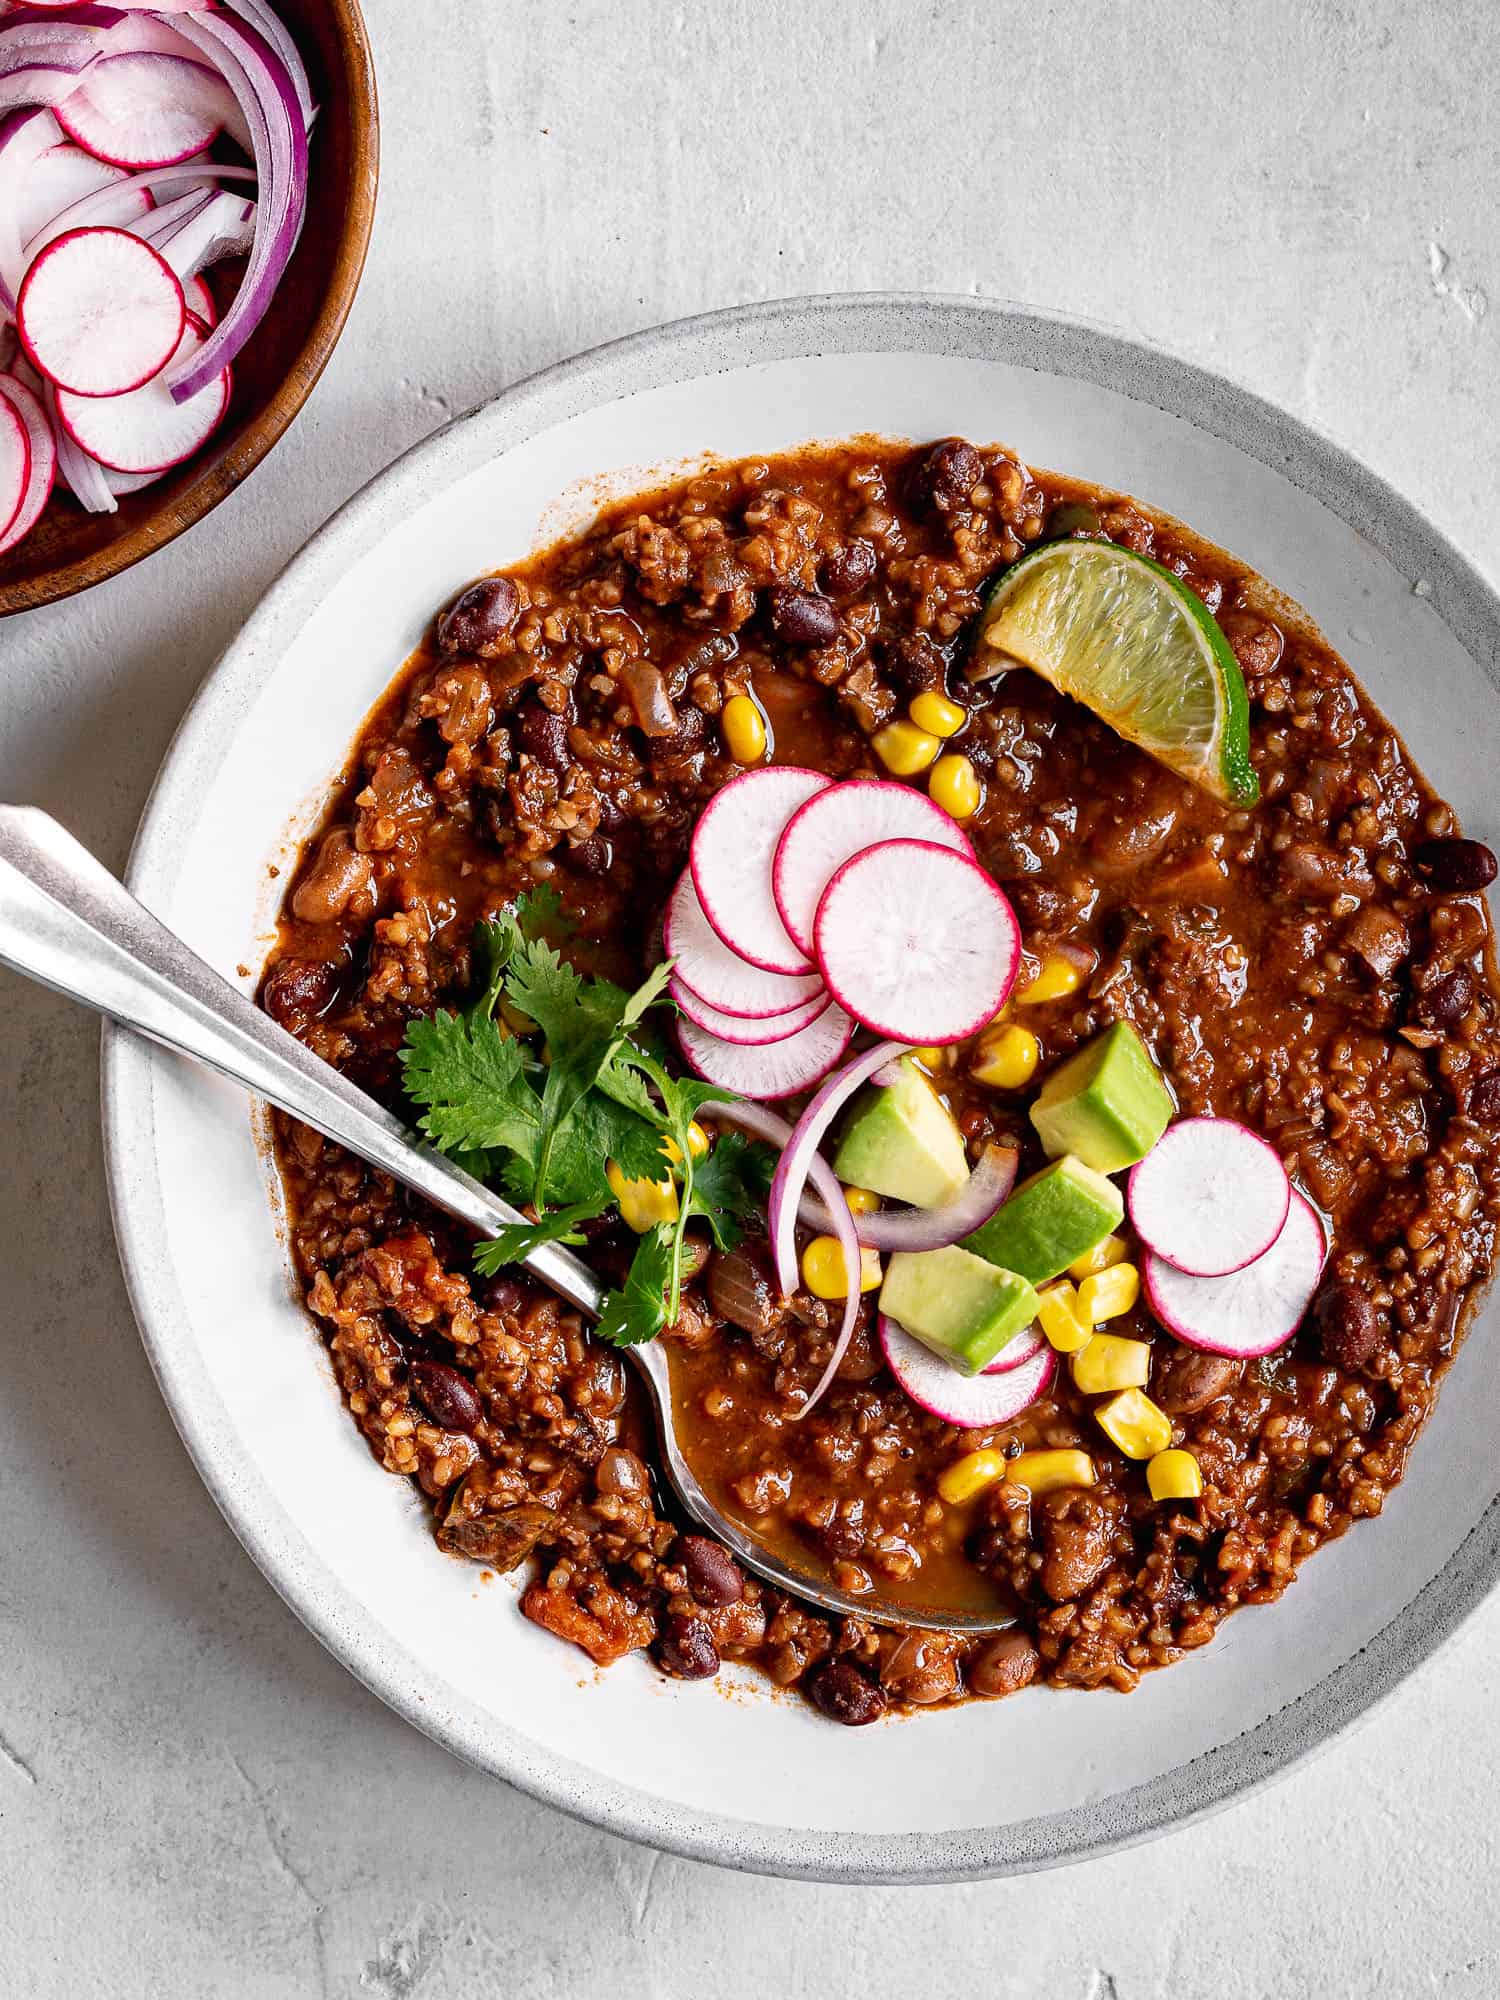 Vegan Chili in a bowl with toppings